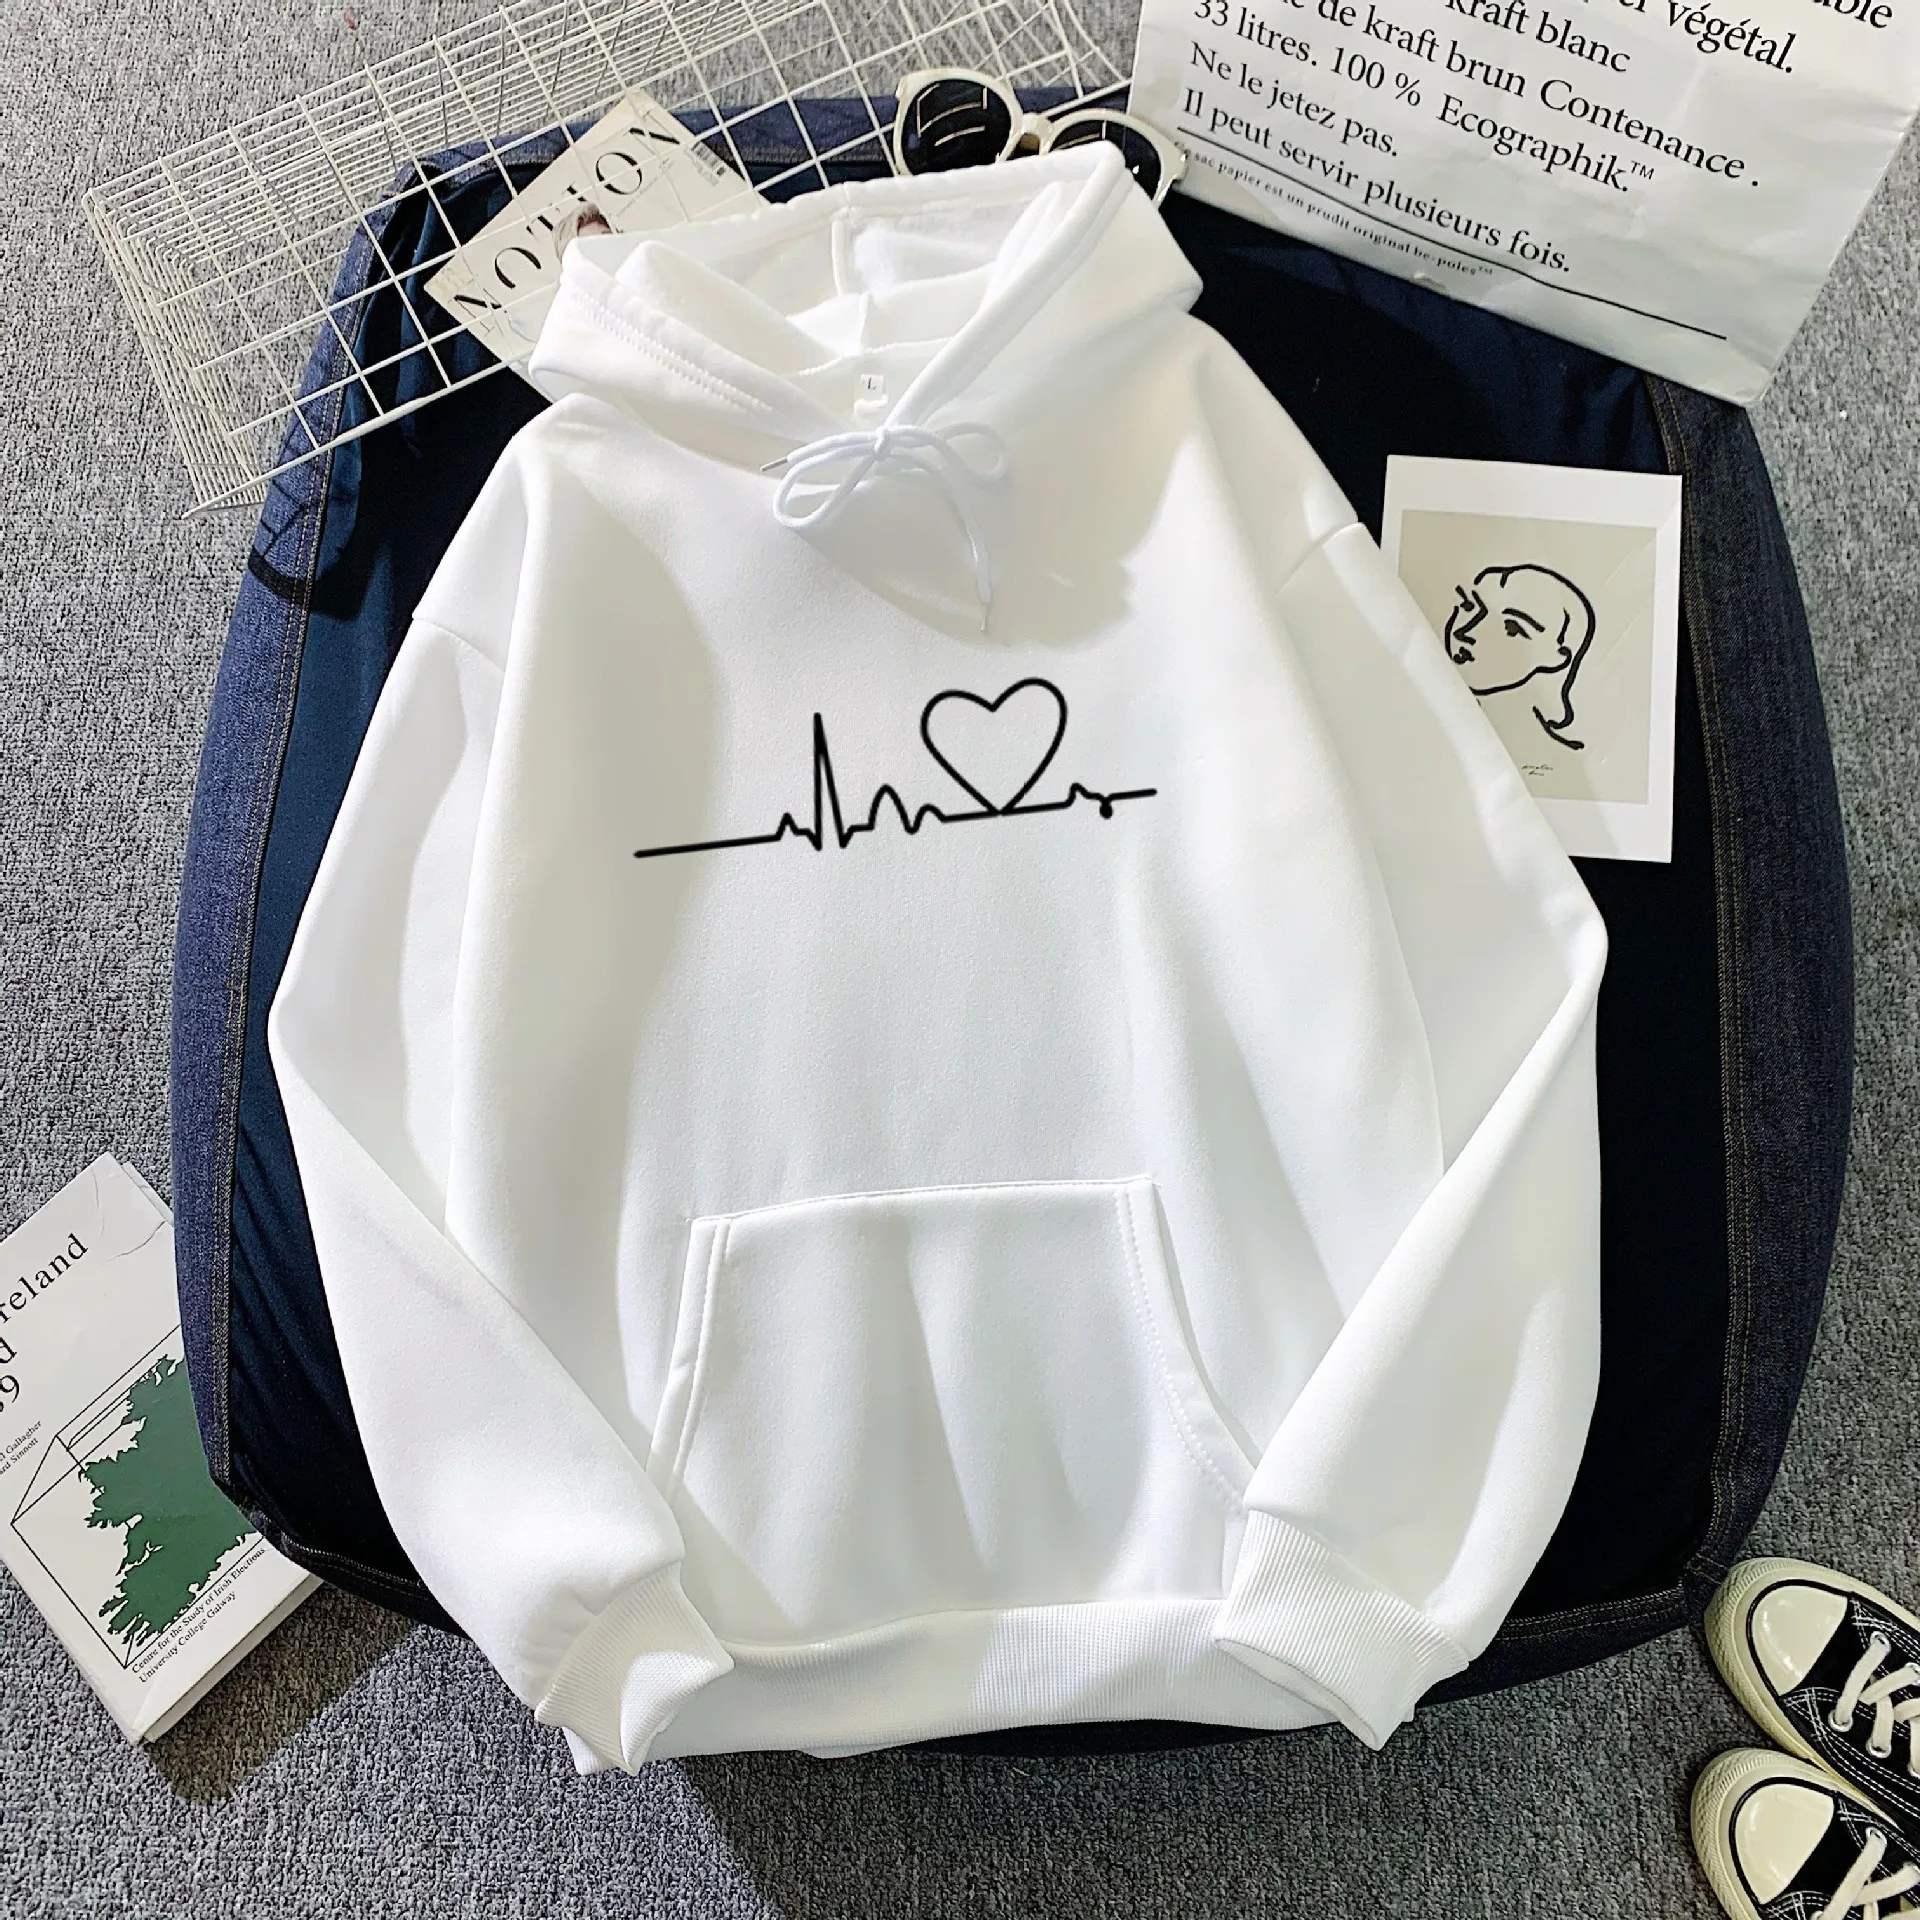 Winter Autumn Women Mens Fashion Hooded Hoodies ECG Printed Sweaters Plus Size Sweatshirts Sports Pullover Tops